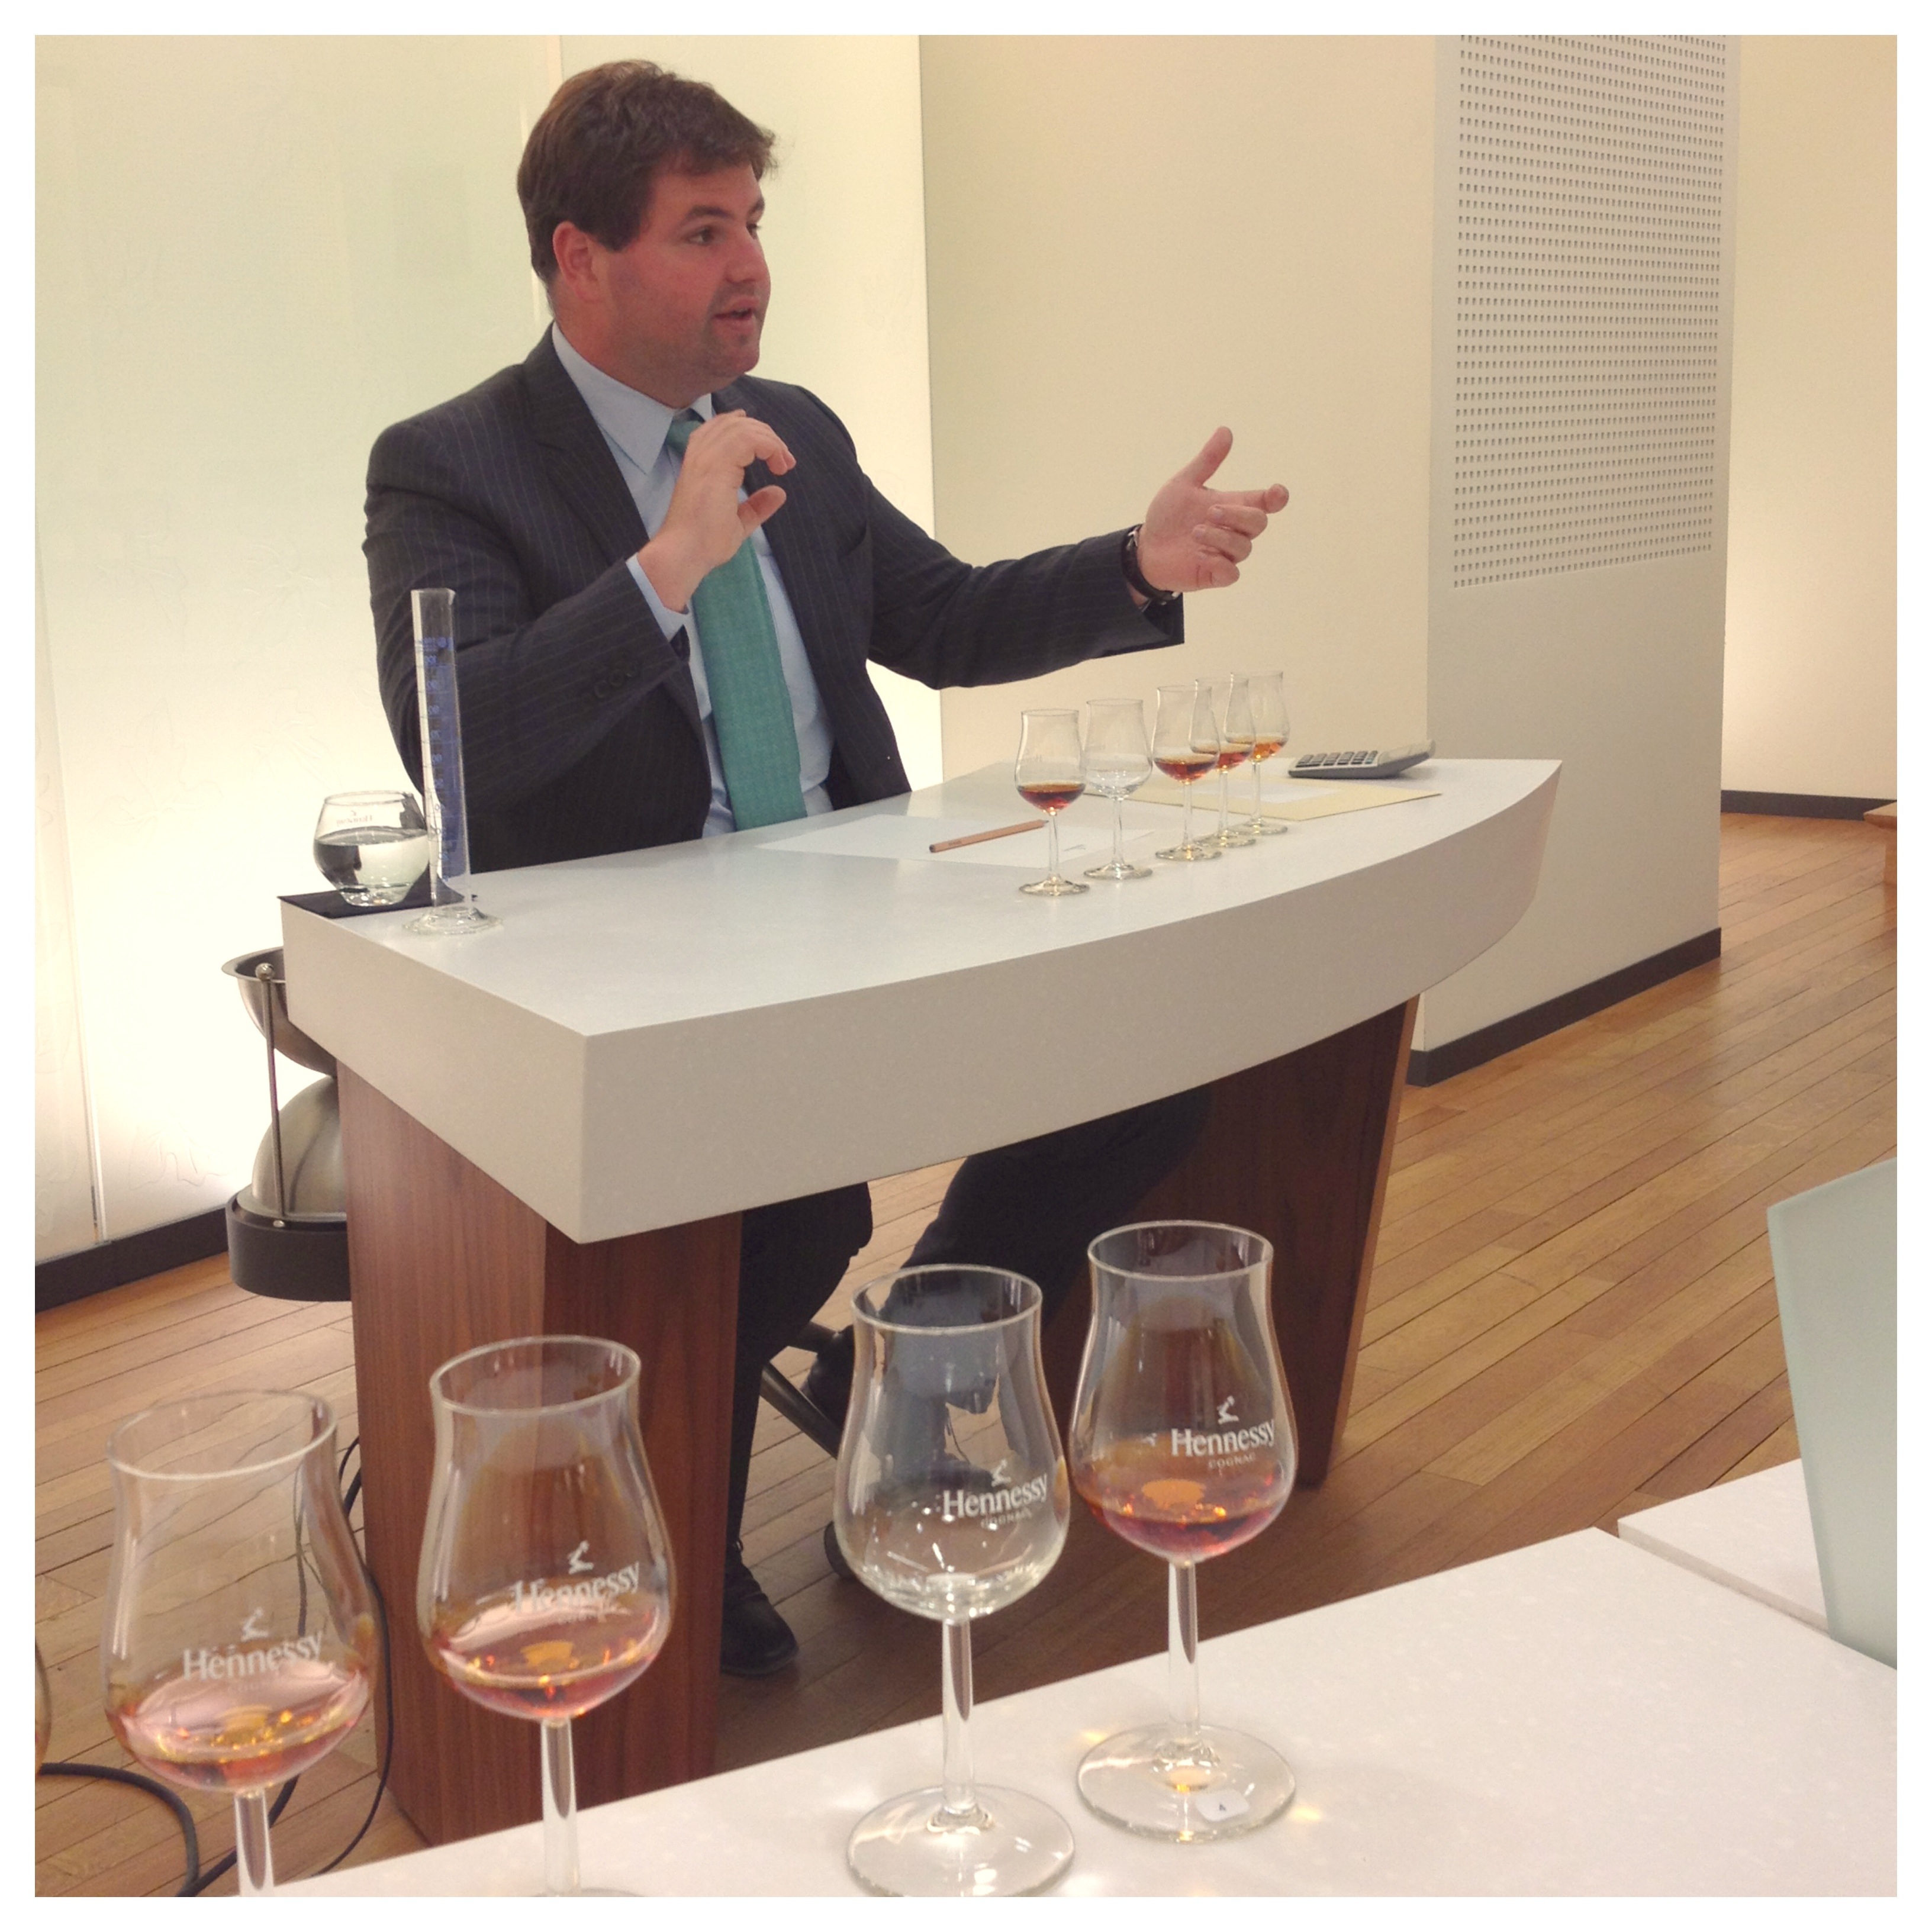 Tasting-Blending session with Renaud